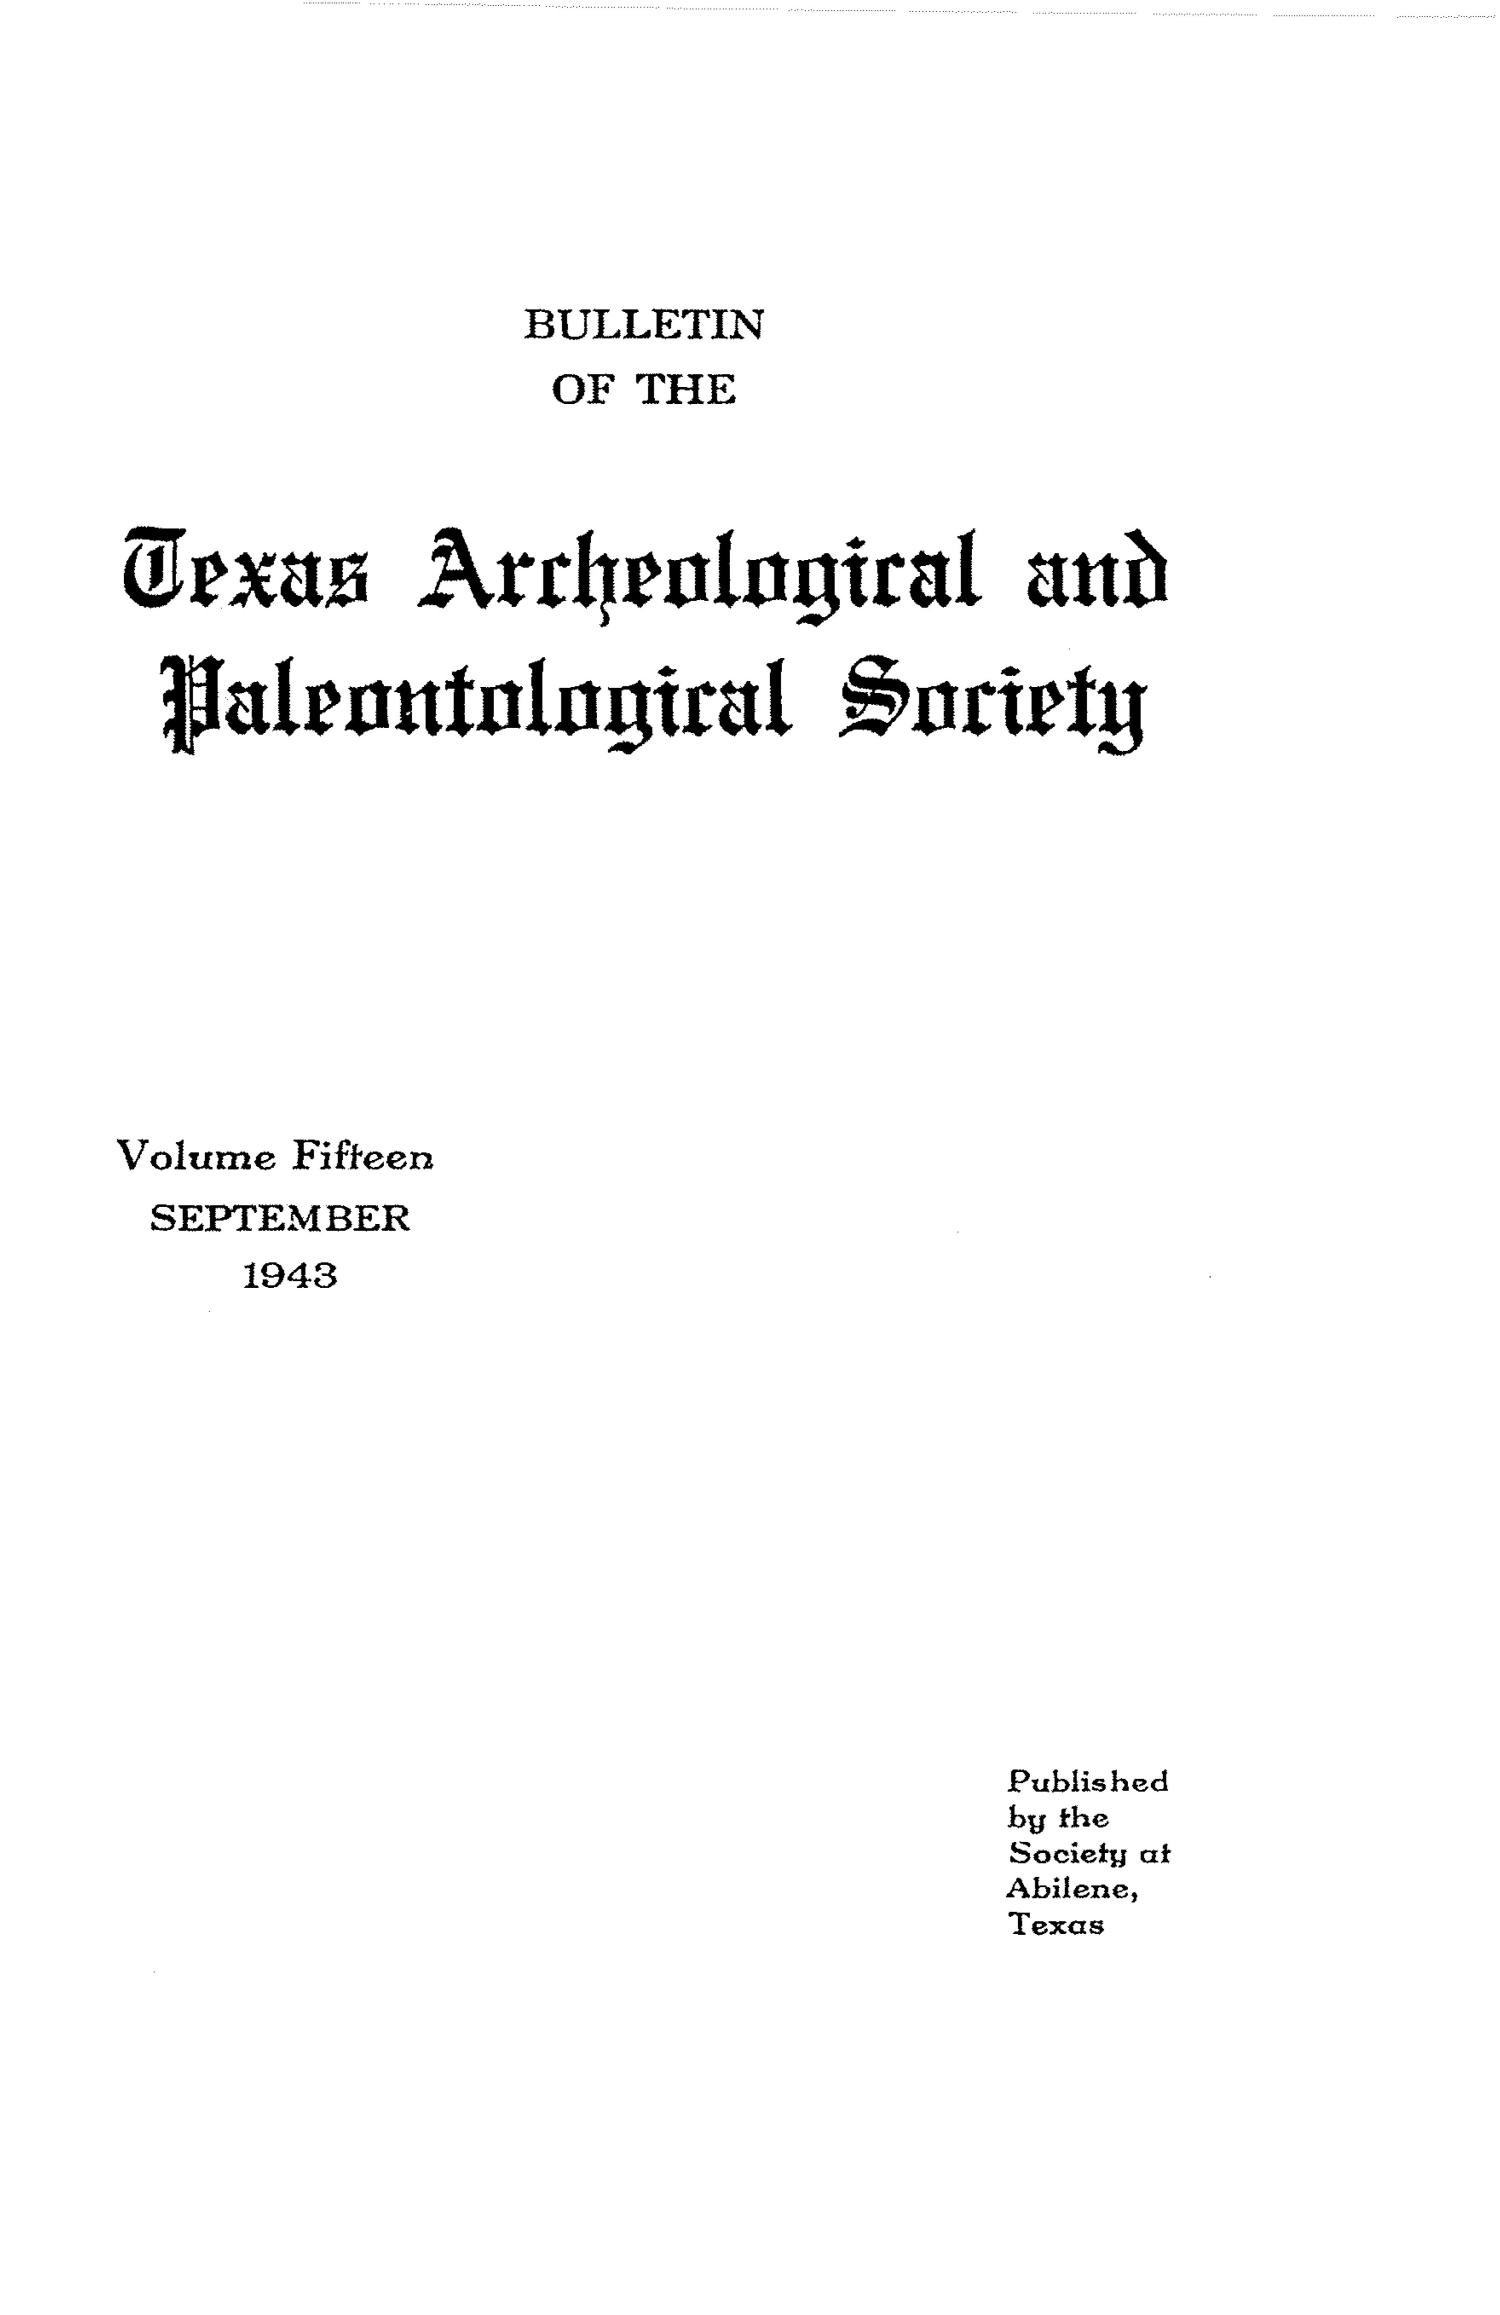 Bulletin of the Texas Archeological and Paleontological Society, Volumes 15 & 16, 1943-1945
                                                
                                                    Title Page
                                                